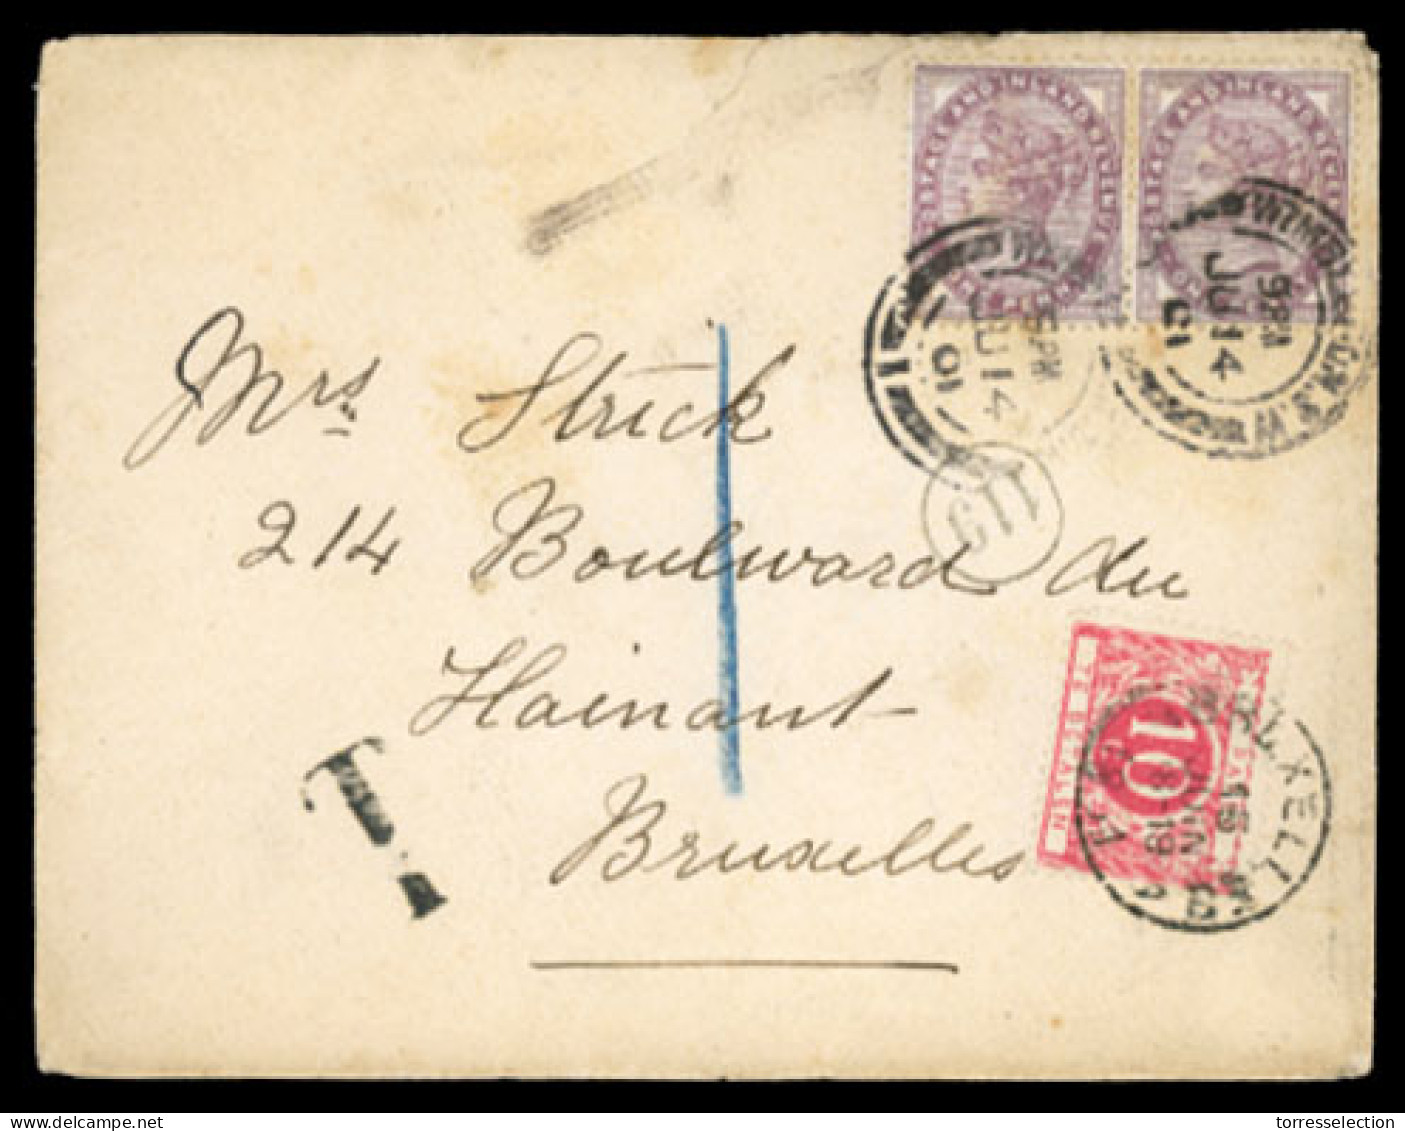 GREAT BRITAIN. 1901. Wimbley To Belgium. Taxed Frkd Env.+postage Due (be==Belgium). F-VF. - ...-1840 Voorlopers